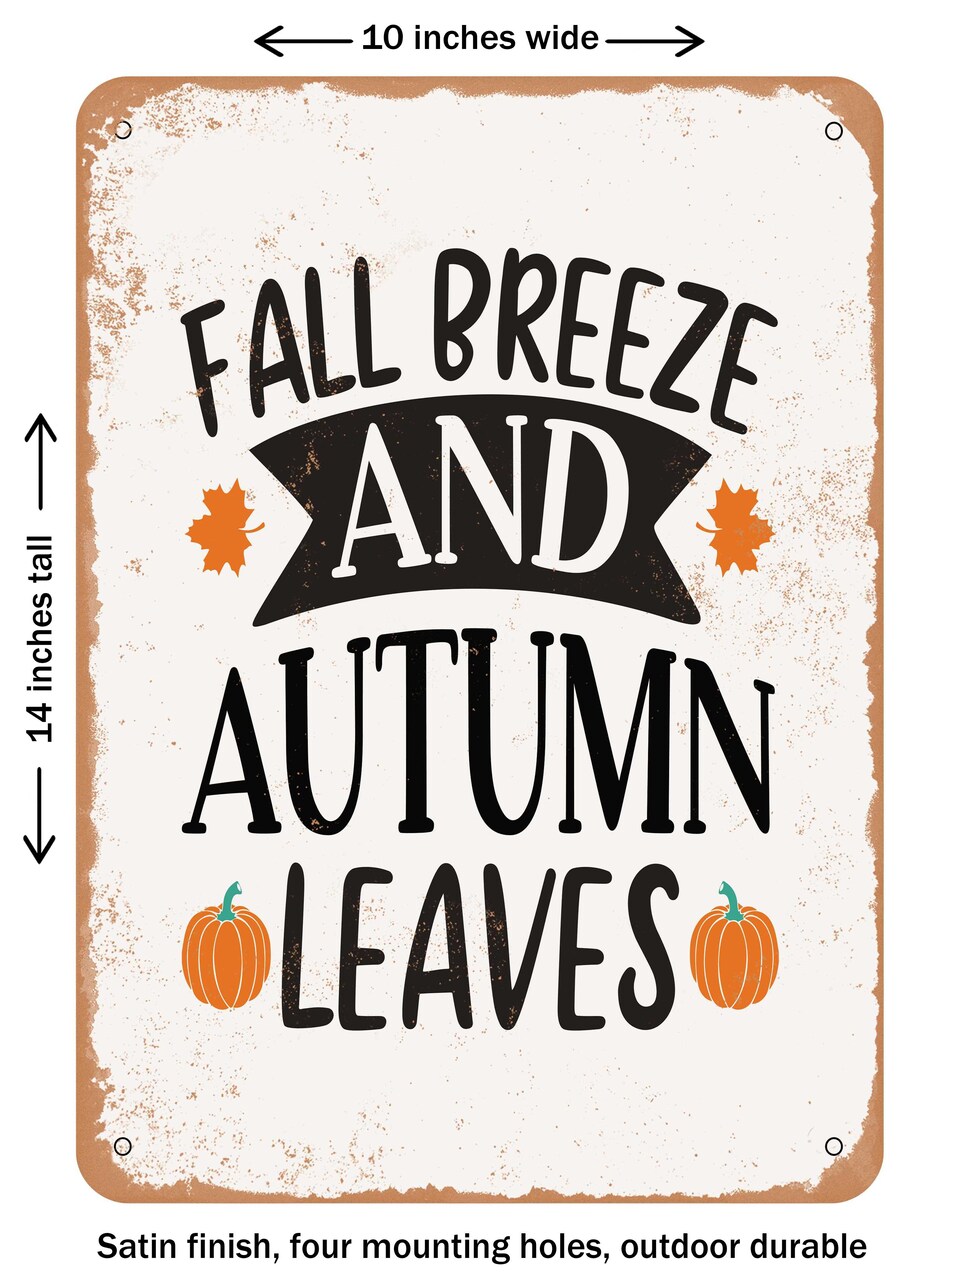 DECORATIVE METAL SIGN - Fall Breeze and Autumn Leaves  - Vintage Rusty Look